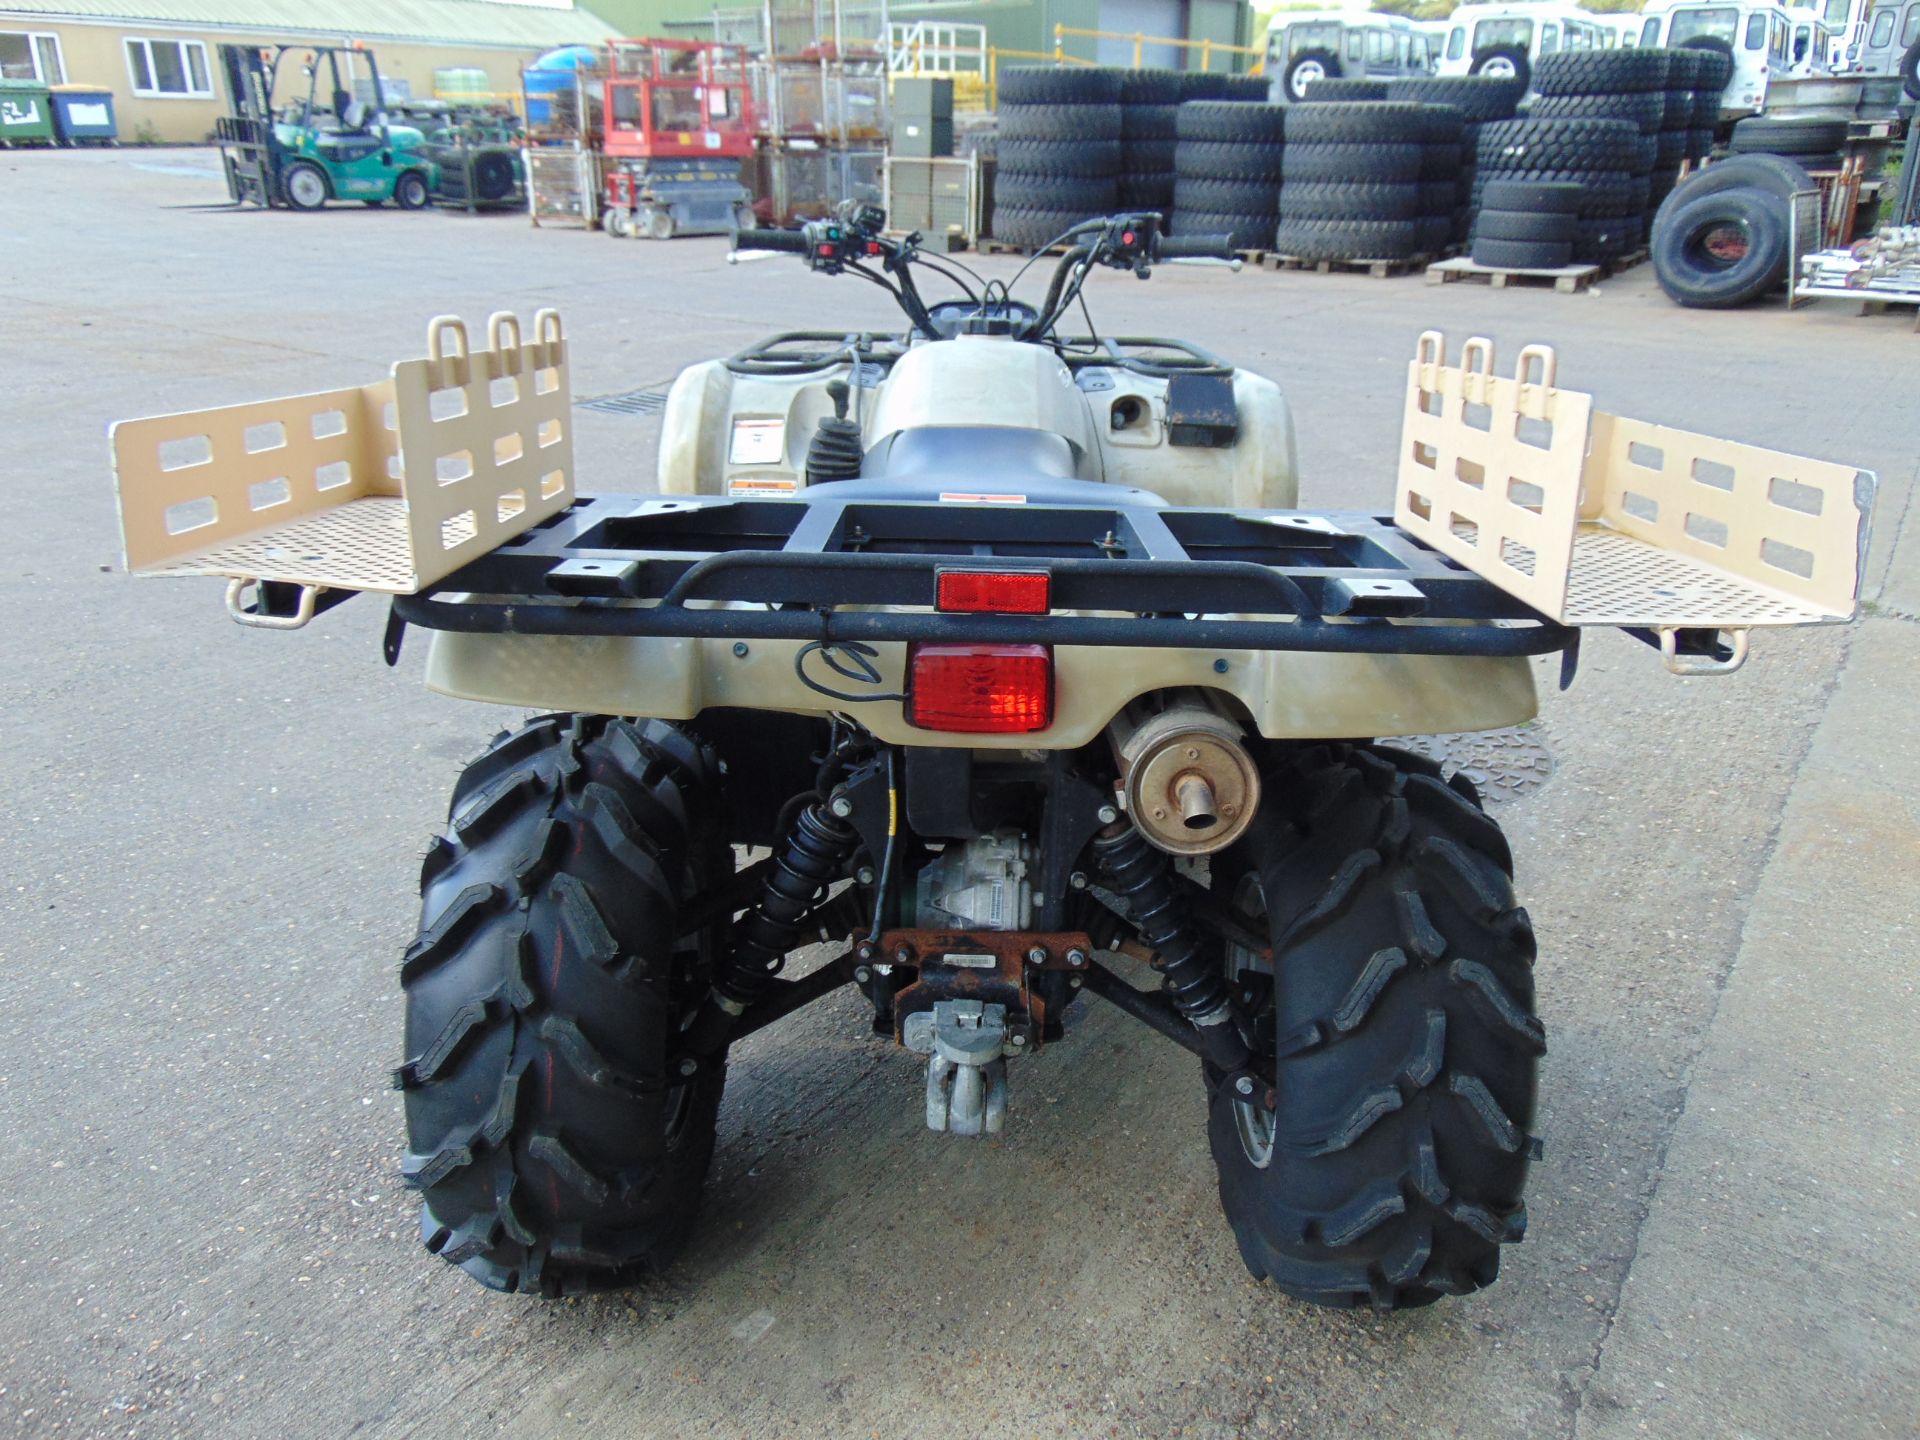 Military Specification Yamaha Grizzly 450 4 x 4 ATV Quad Bike Showing 223 hrs - Image 9 of 23